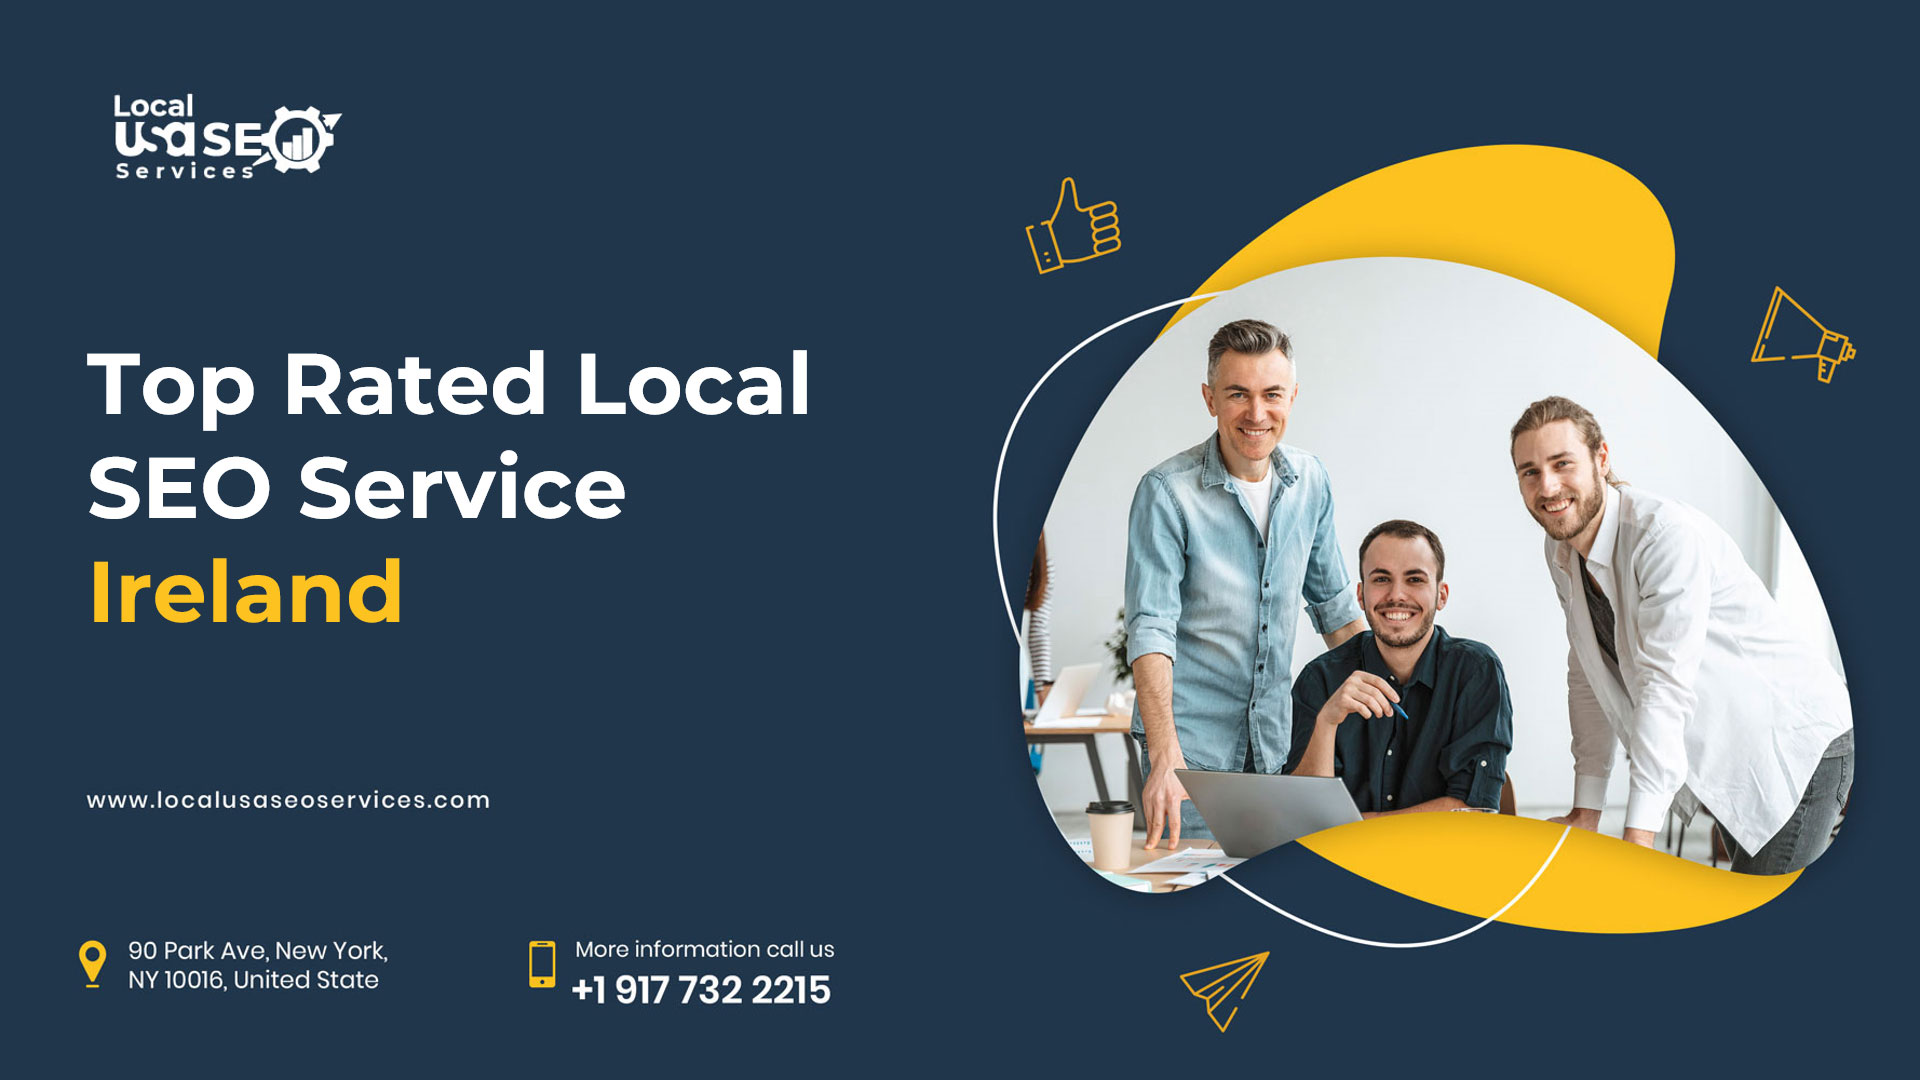 Top Rated Local SEO Service Ireland